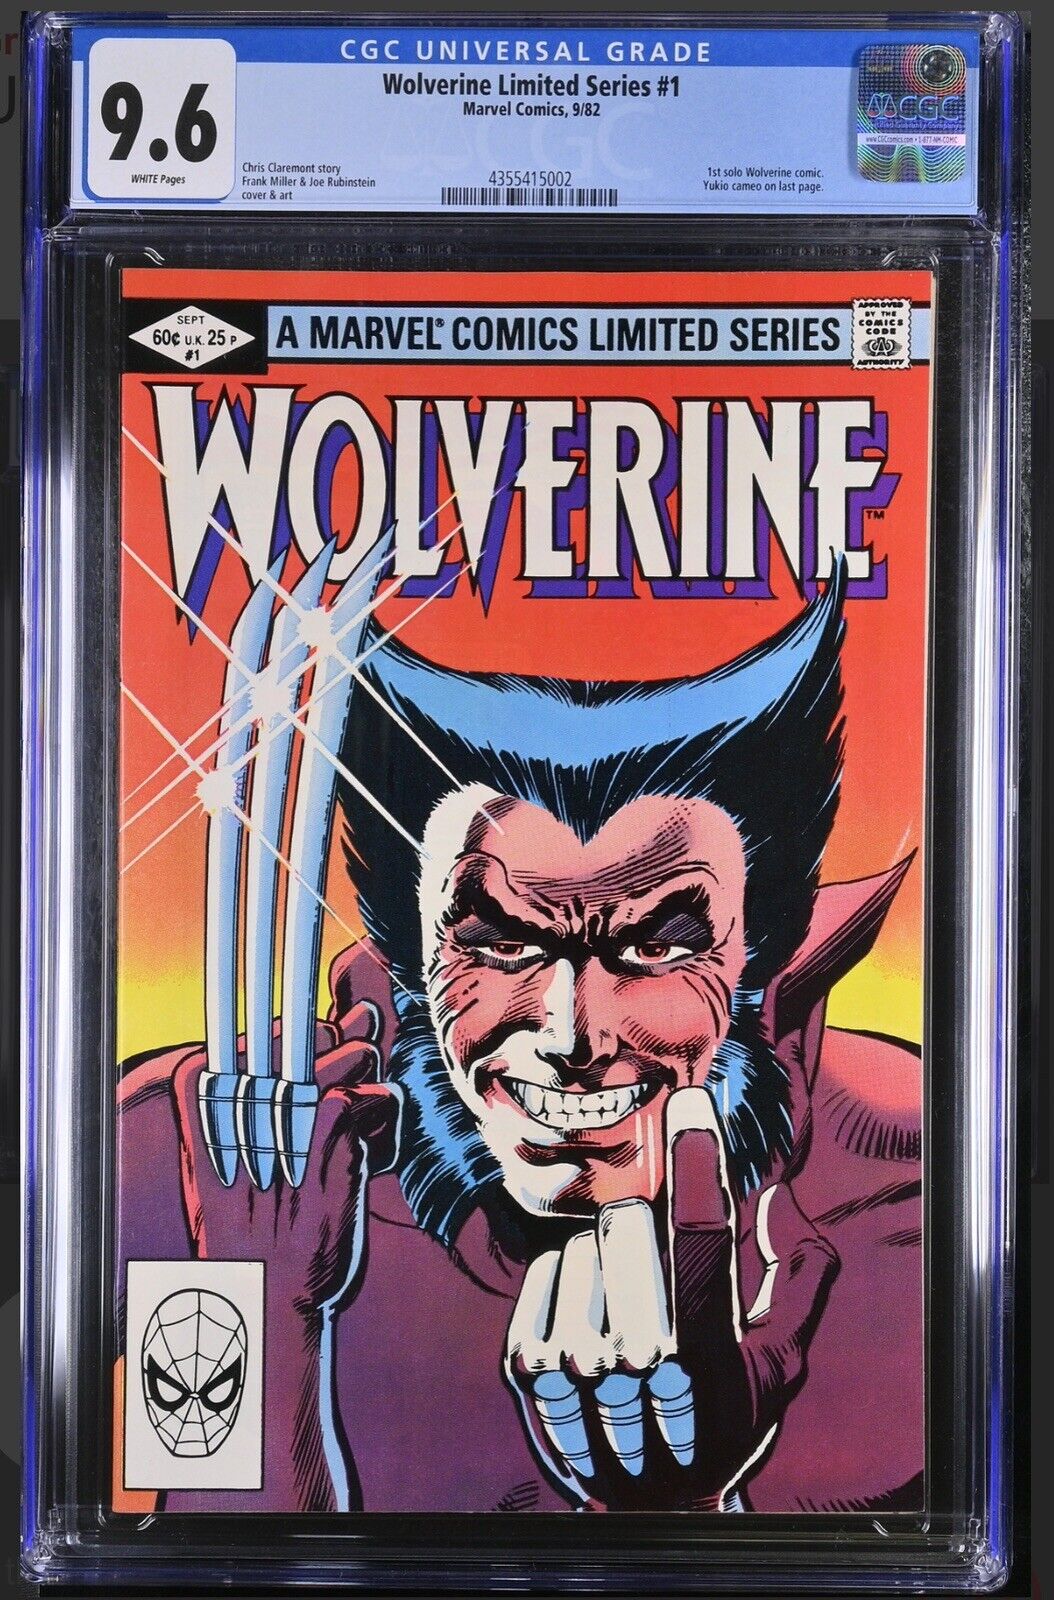 Wolverine Limited Series #1 CGC 9.6 NM+WP 1982 Frank Miller White Pages